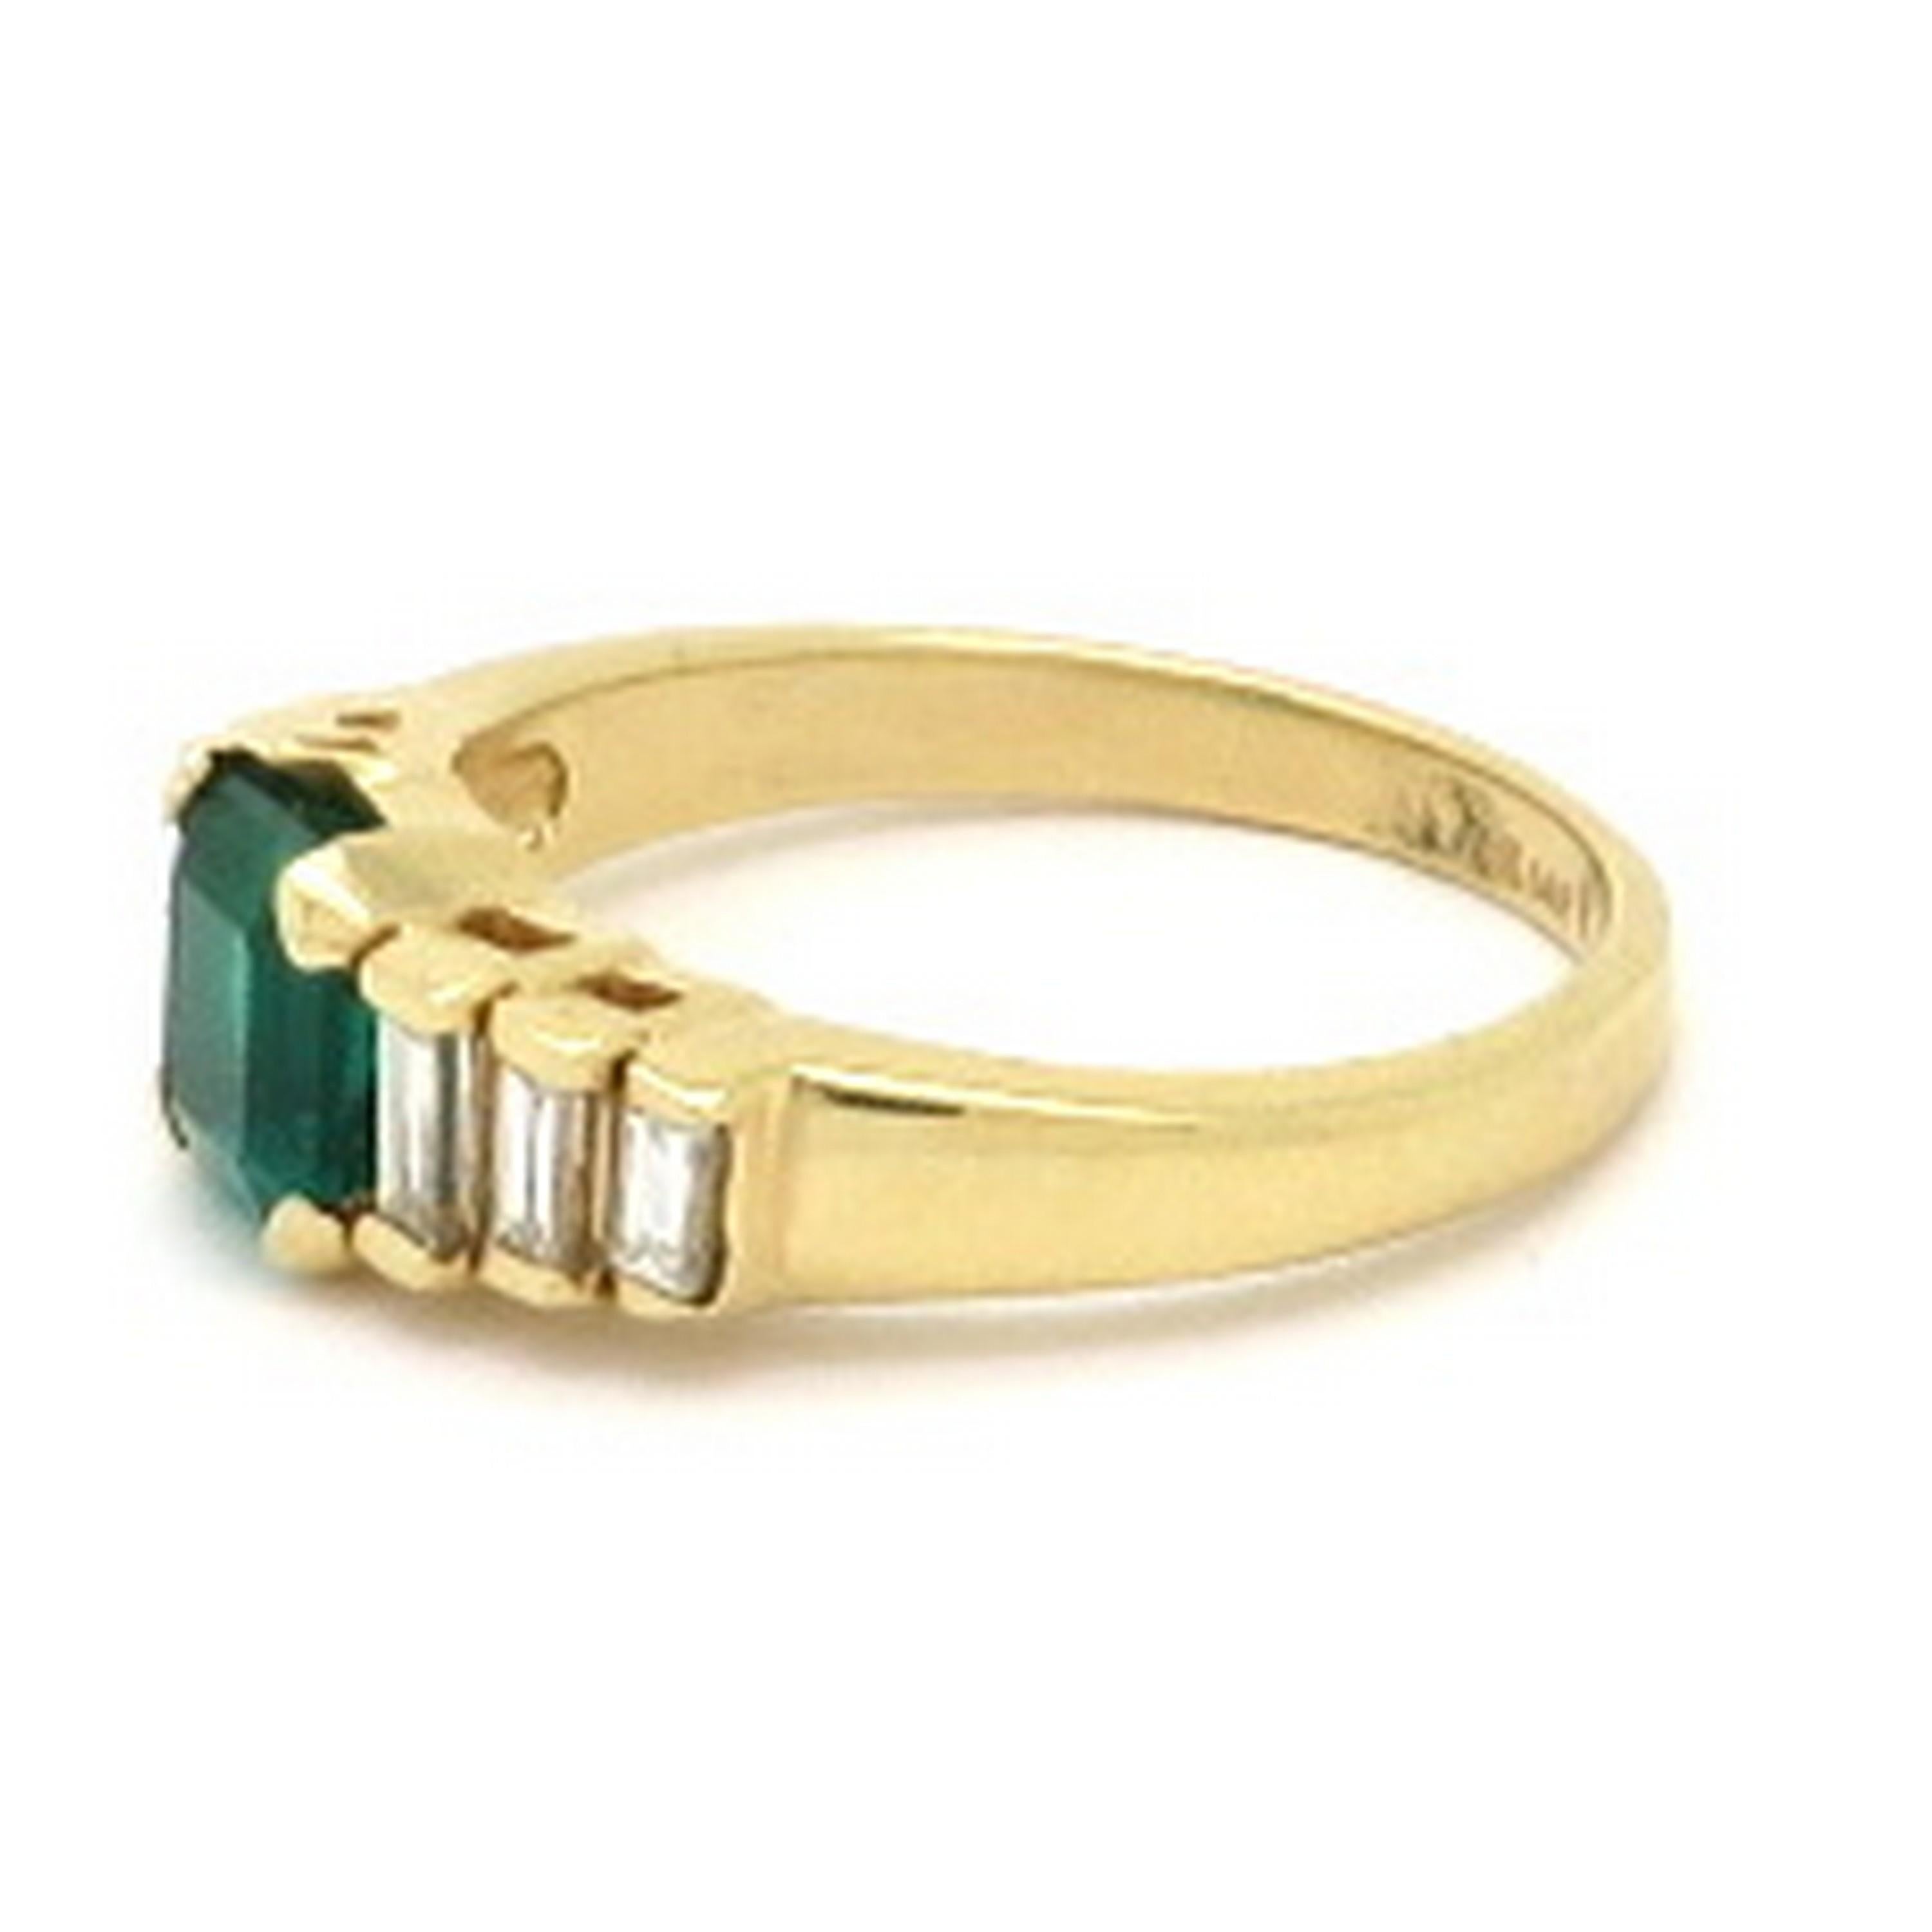 Estate 14K yellow gold AGL emerald cut Columbian emerald and baguette diamond ring. Showcasing one emerald cut fine quality AGL certified emerald, four prong set, weighing approximately 1.20 carats. Flanking the center stone are six channel set